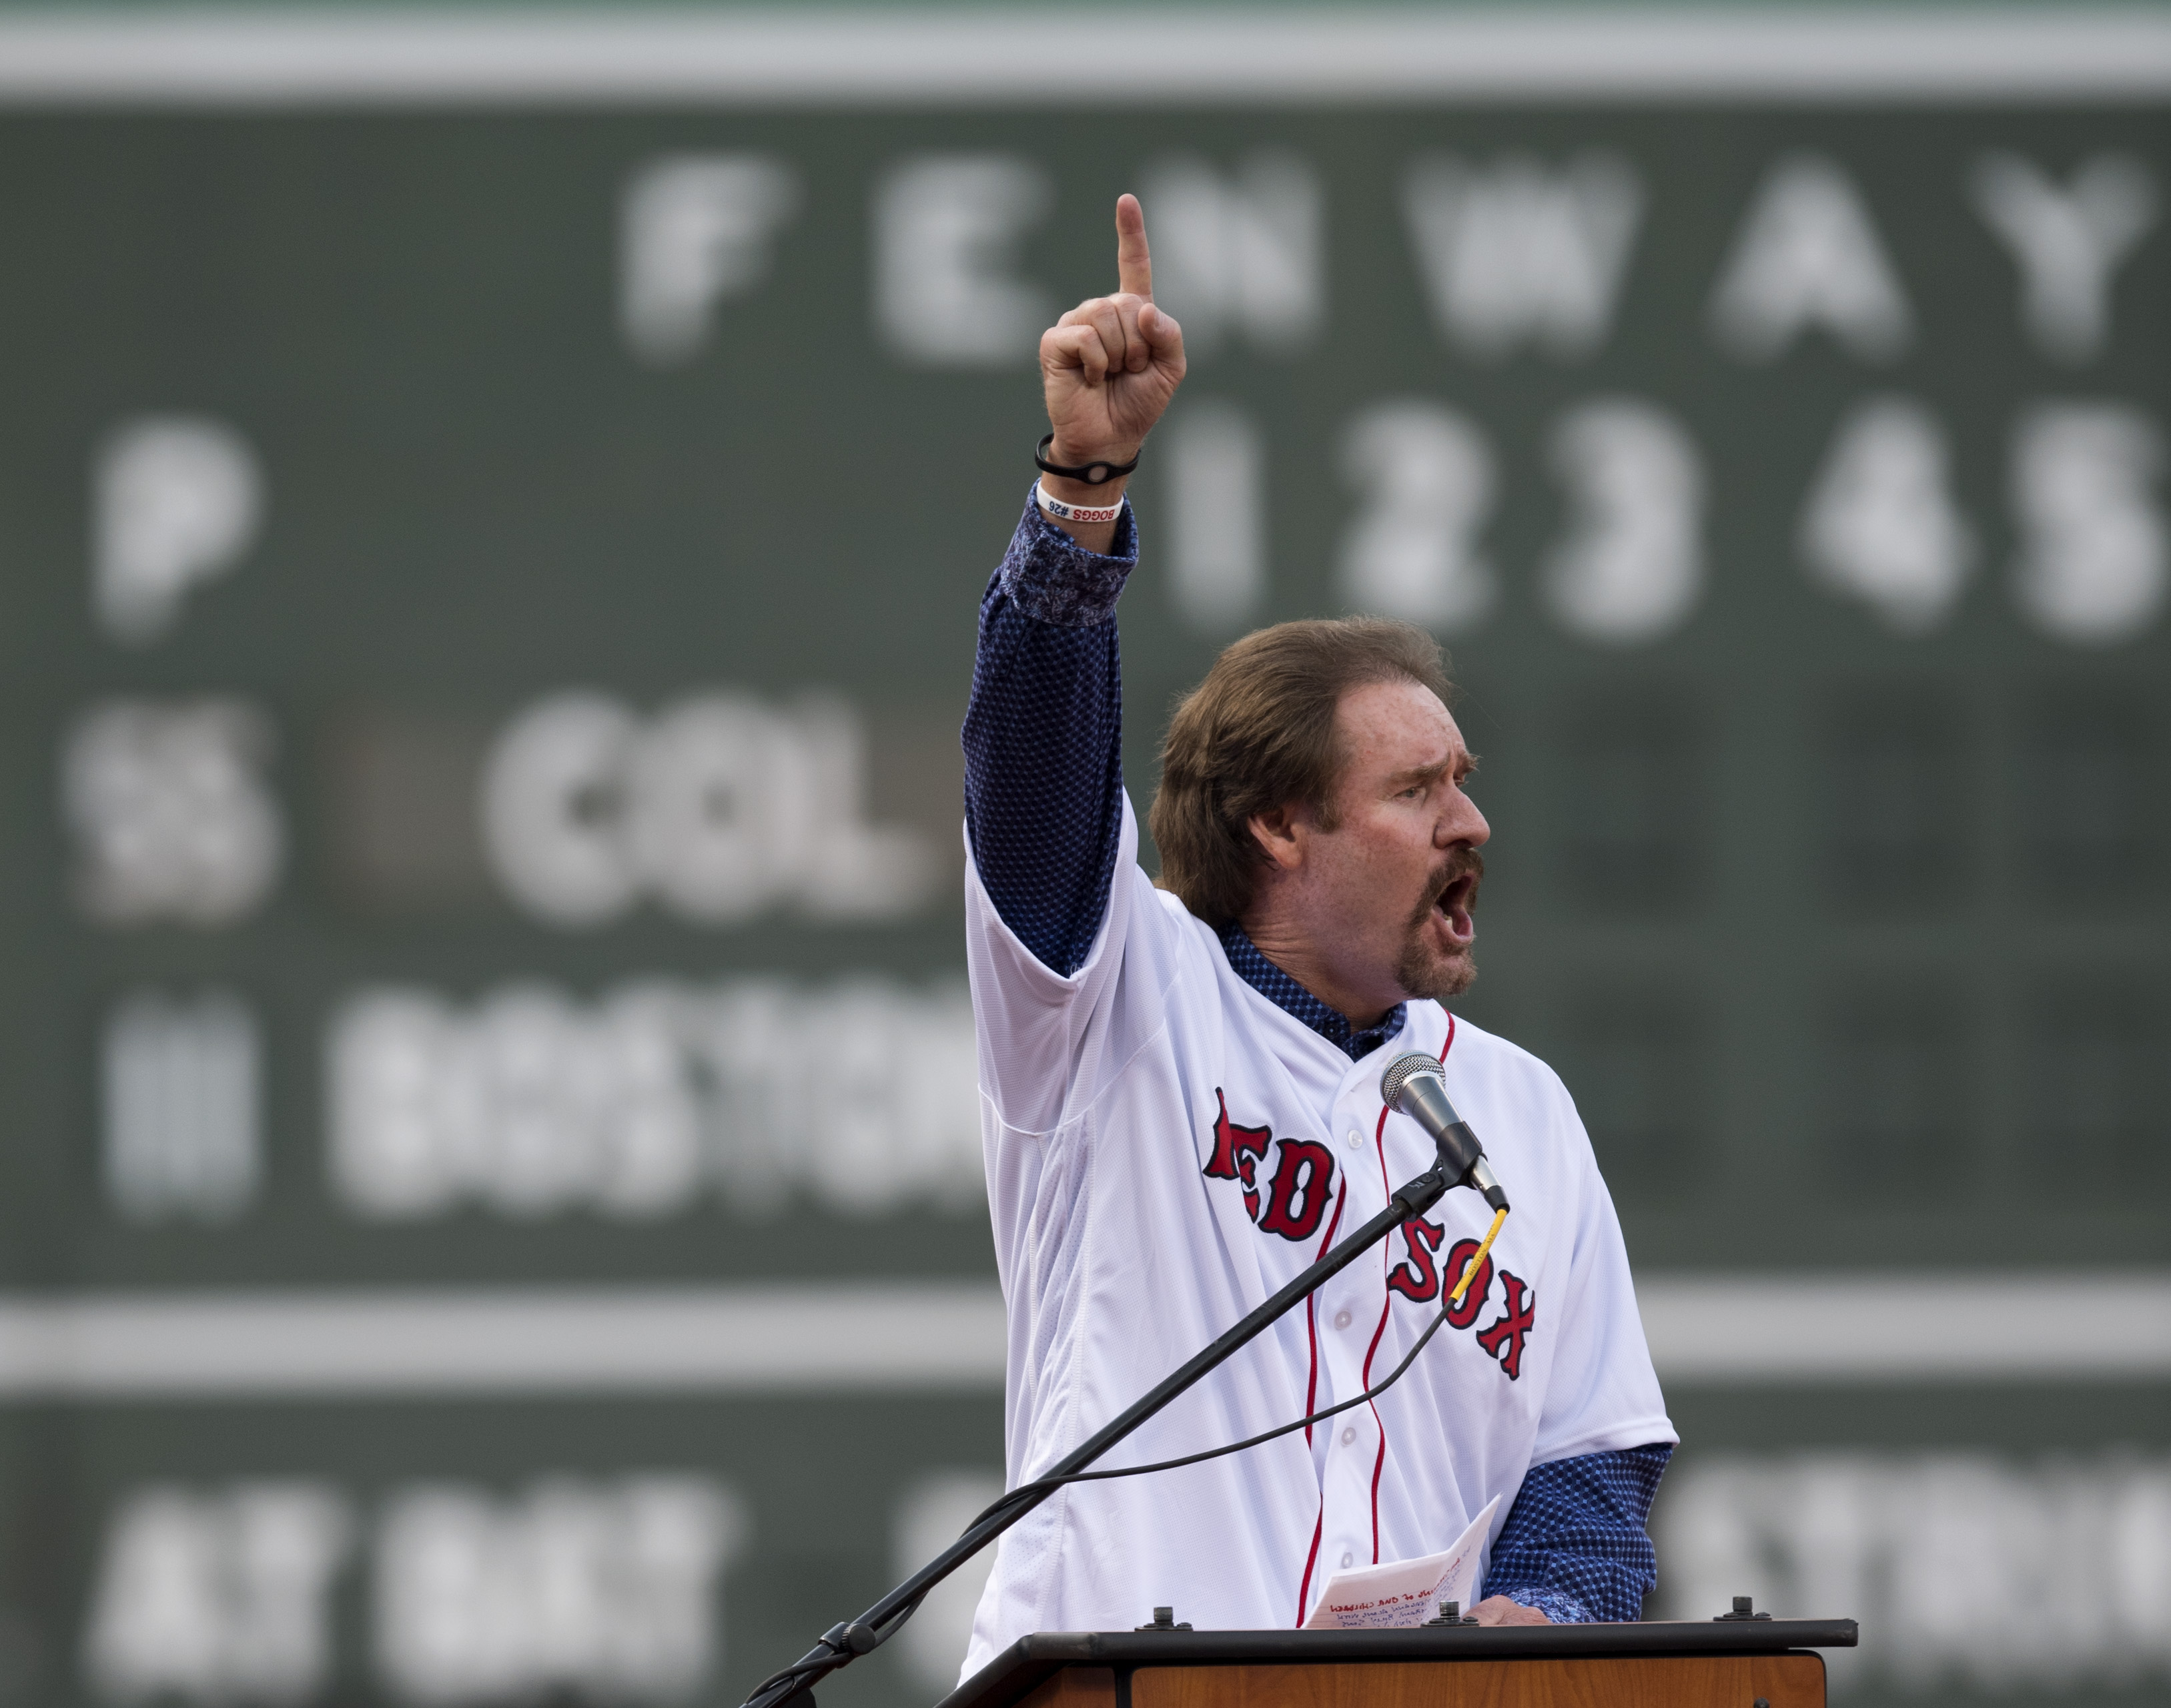 BOSTON, MA - MAY 26: Former Boston Red Sox third baseman Wade Boggs addresses the crowd during a ceremony to retire his number 26 on May 26, 2016 at Fenway Park in Boston, Massachusetts. Boggs played 11 seasons and collected 2,098 hits as a member of the Red Sox. (Photo by Michael Ivins/Boston Red Sox/Getty Images) *** Local Caption *** Wade Boggs